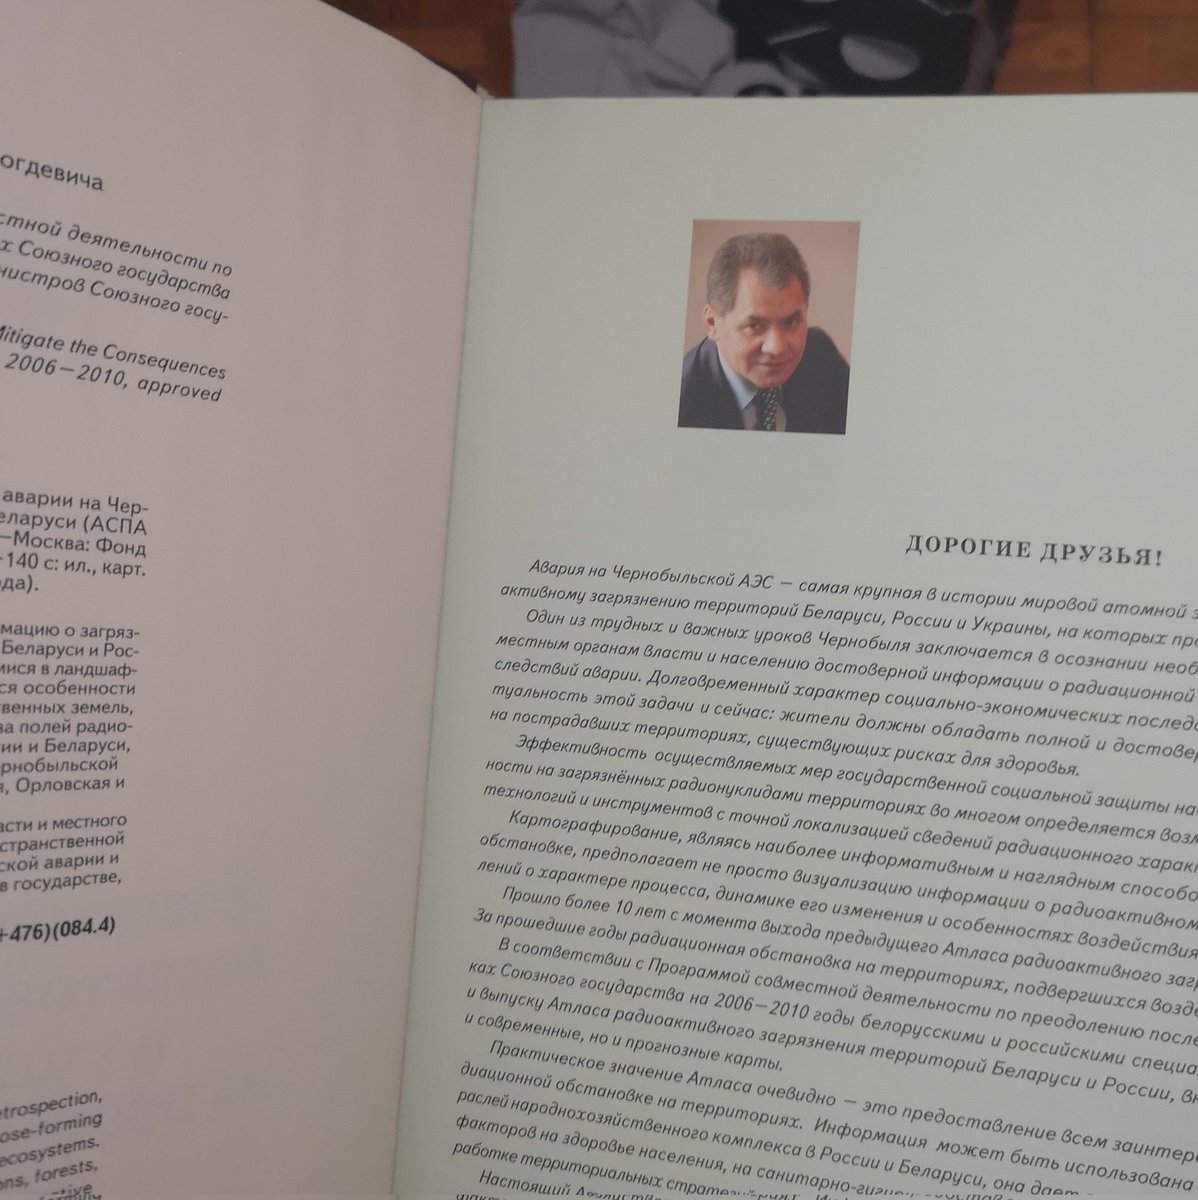 Was lucky to obtain a peculiar document of its time today (& a great resource for my research) - the Atlas of radioactive pollution of Russia & Belarus published in 2009 with the intro by Sergei Shoigu, then Minister of Emergency Situations.